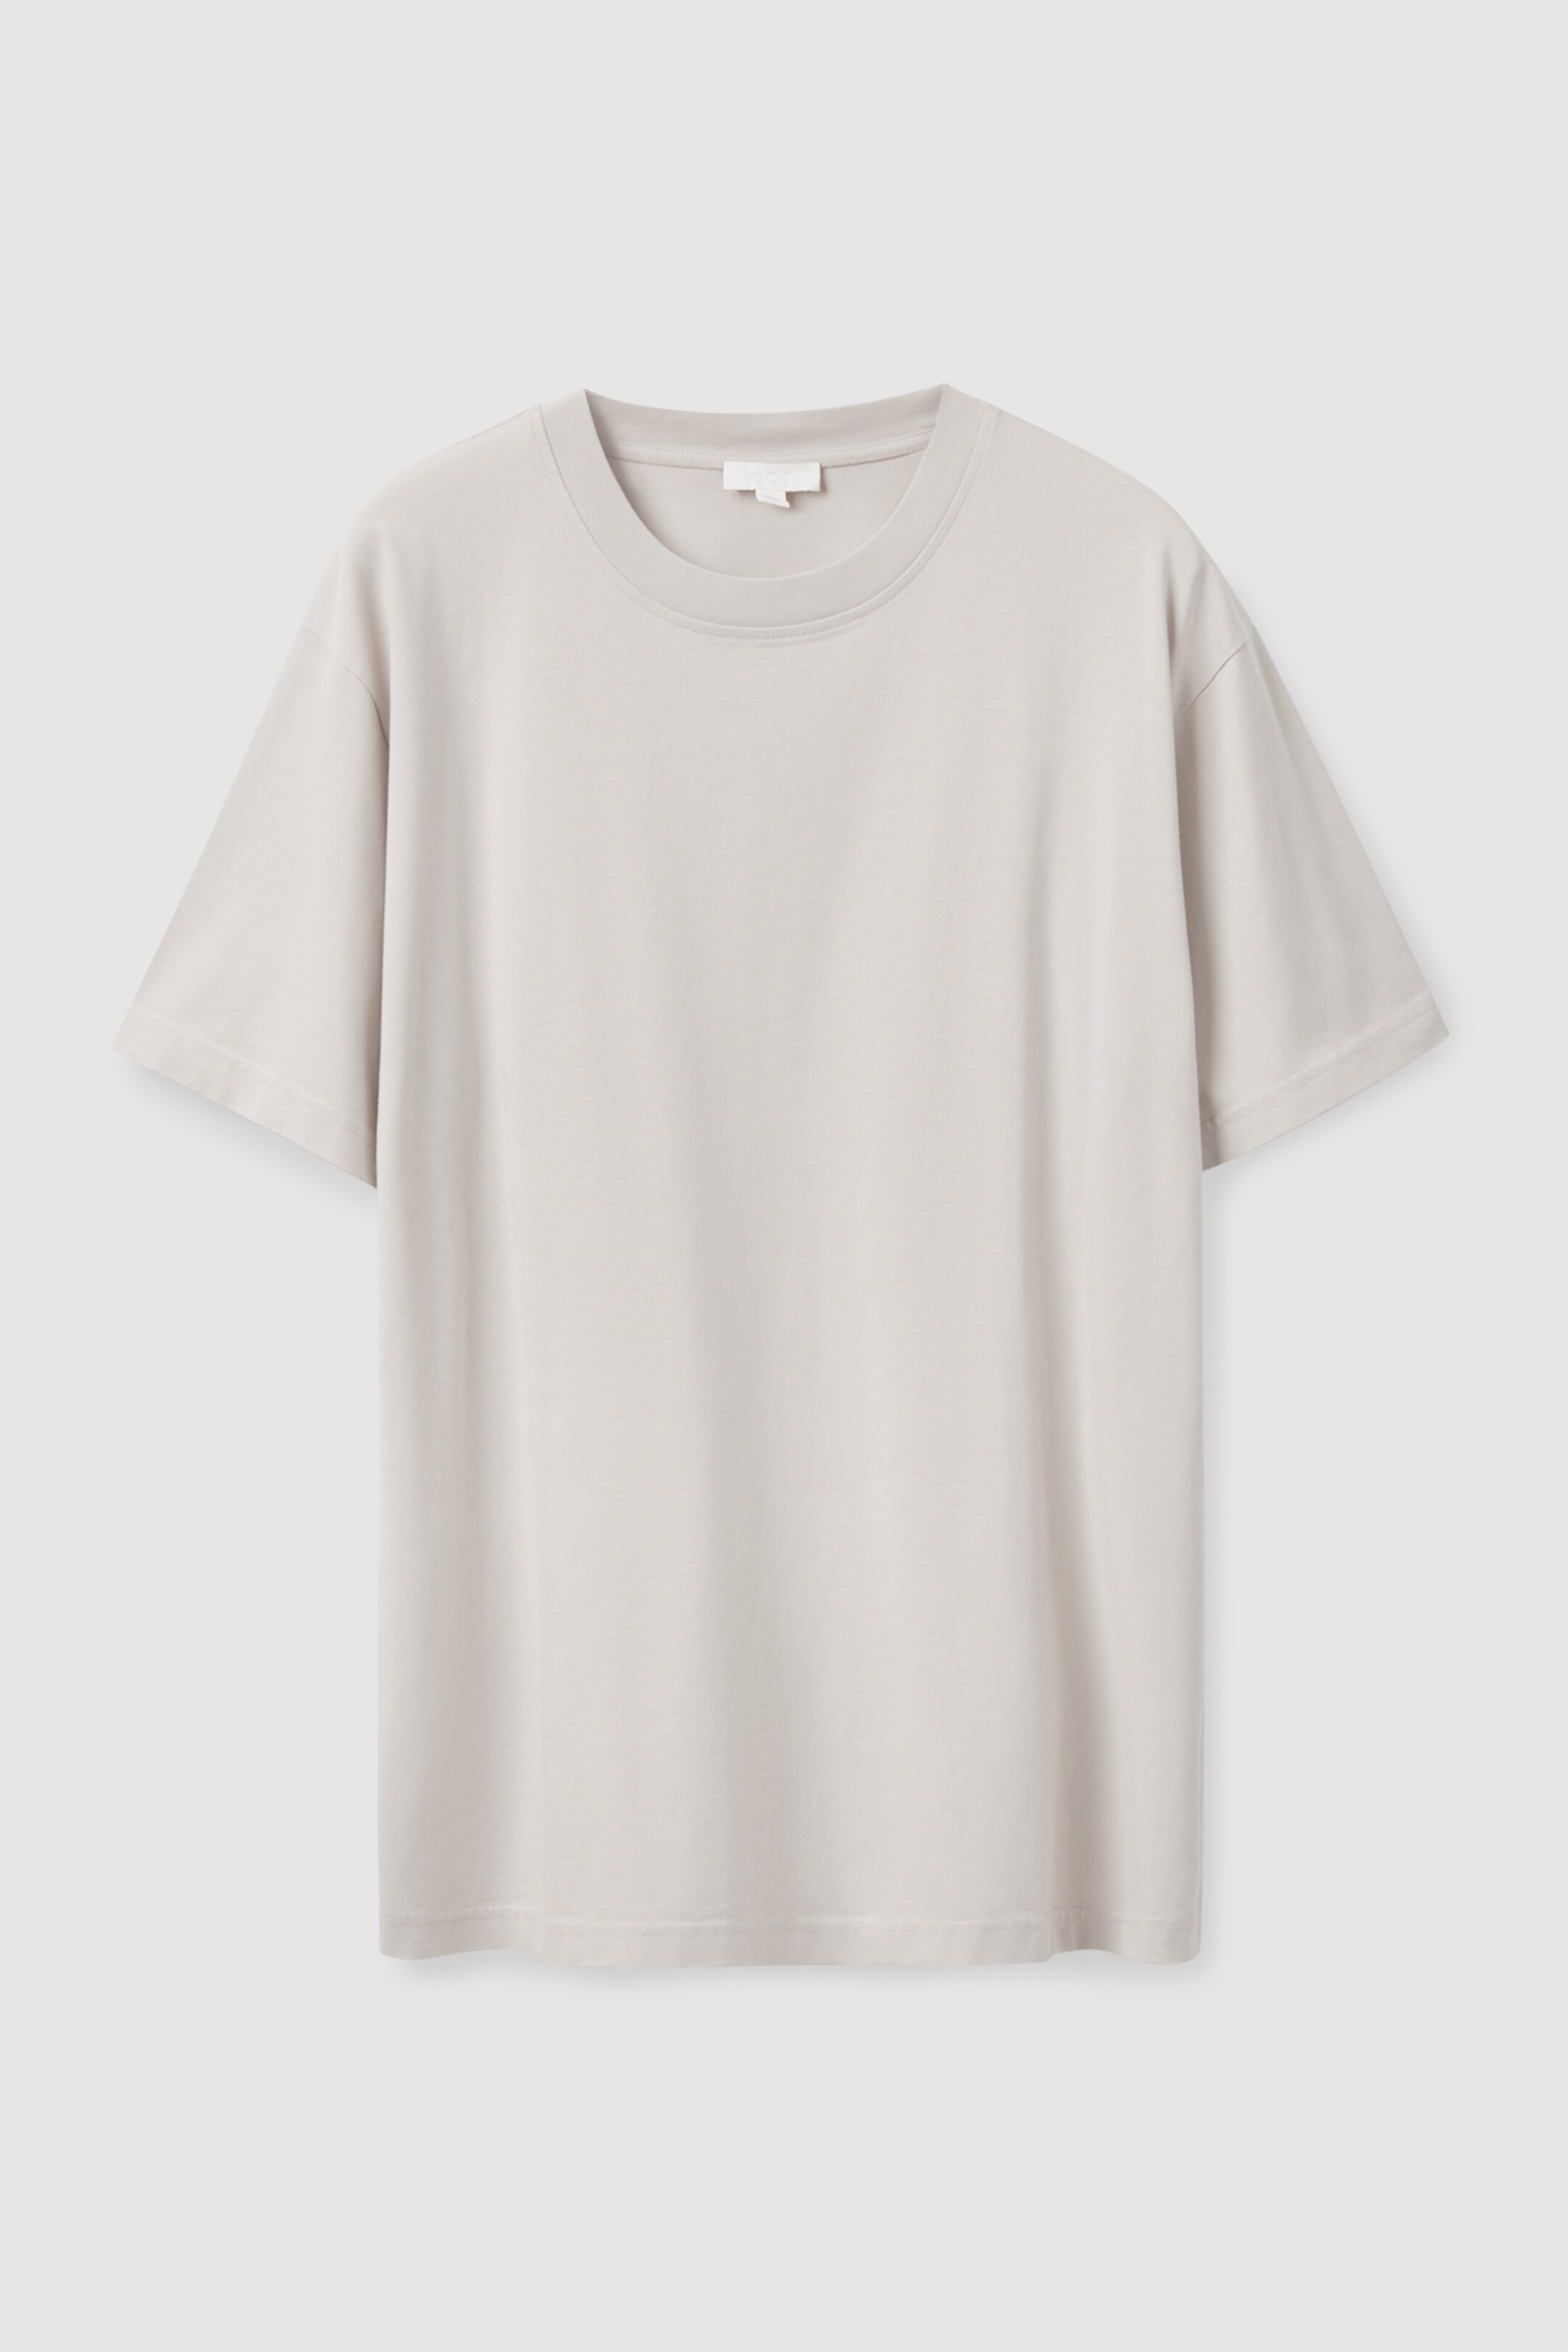 Front image of cos RELAXED-FIT T-SHIRT in off-white